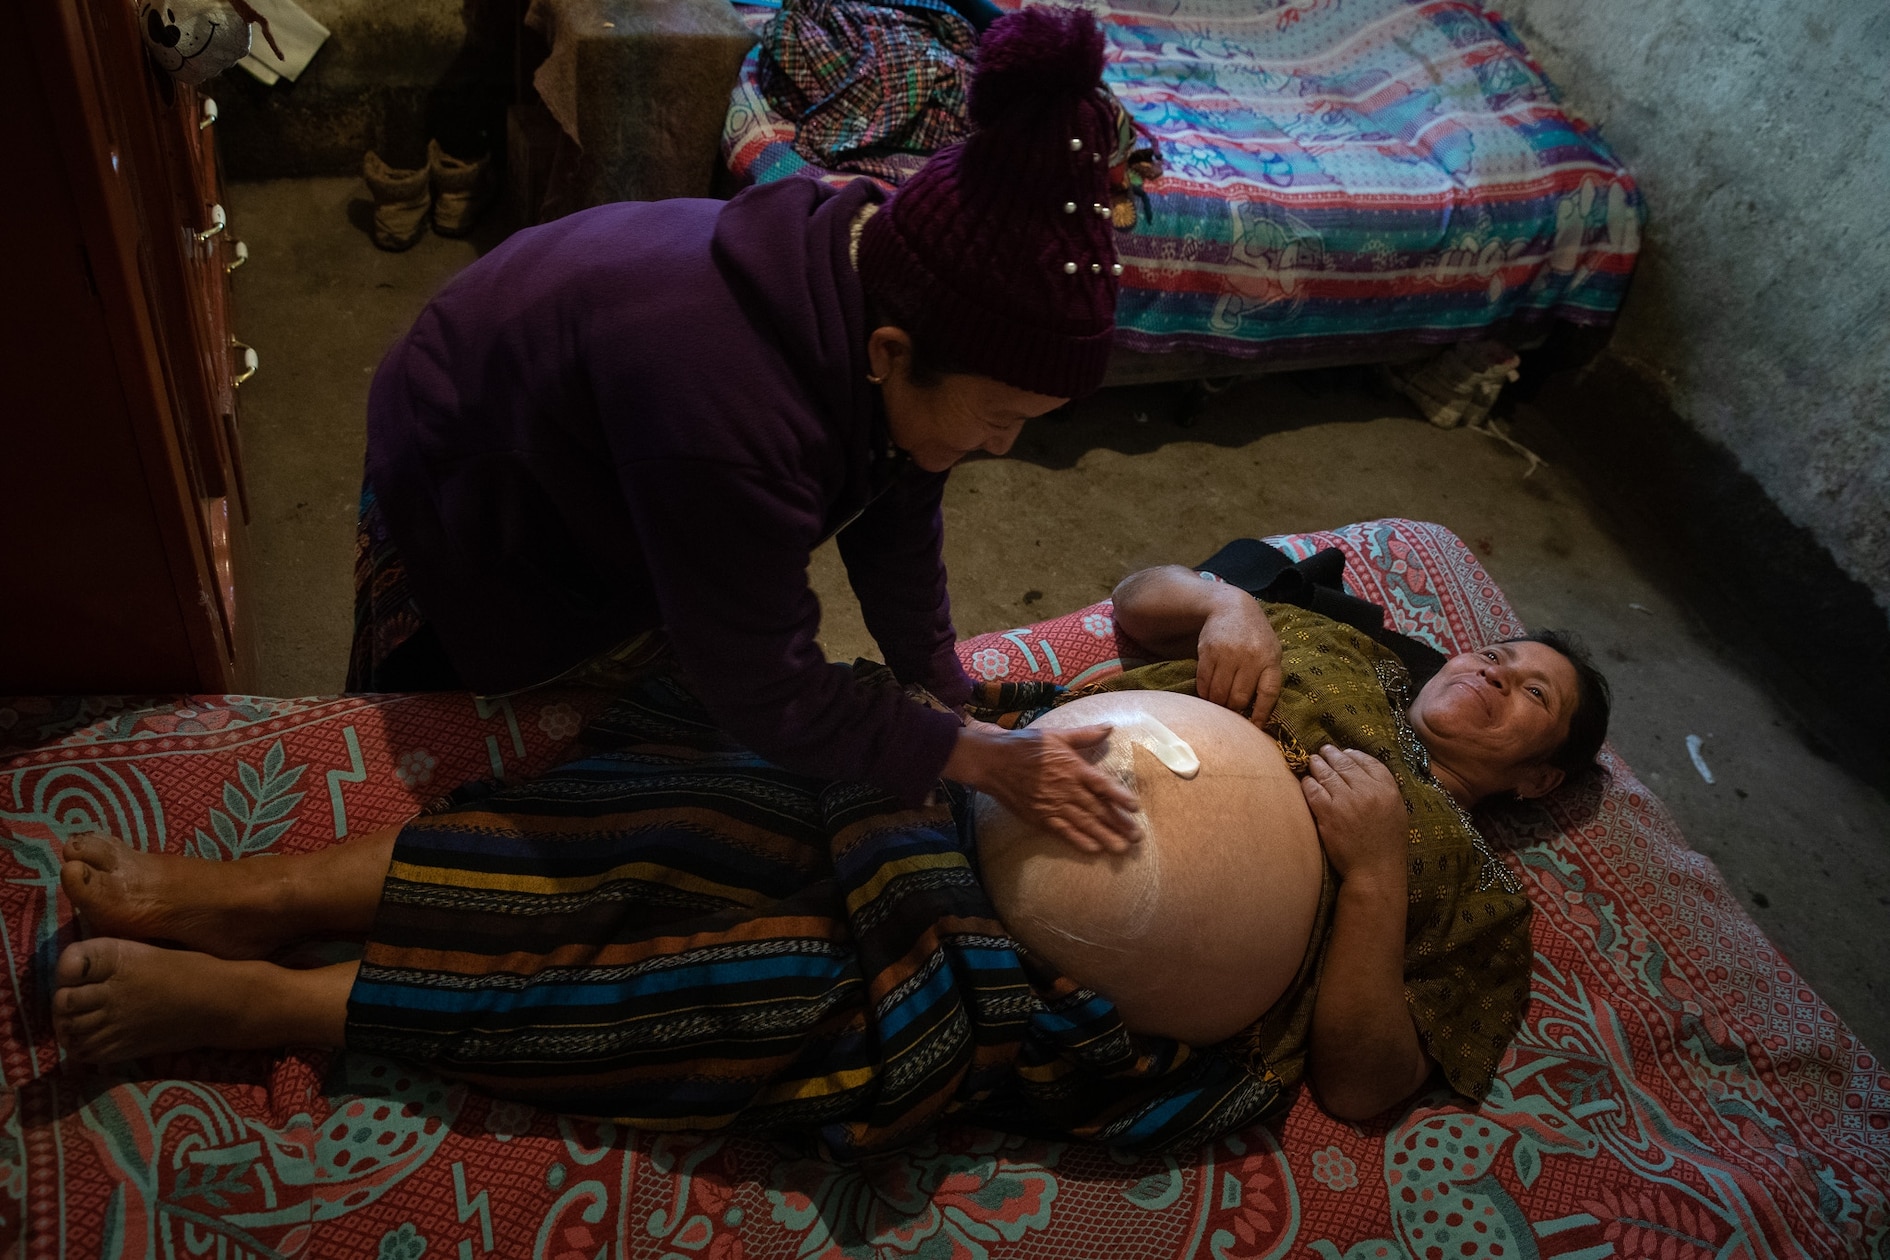 Midwife Epifania Elías Gonzales examines Delfina Vicente López inside Vicente’s home on a remote hilltop not far from San Carlos Sija, Guatemala. During her 30-year career, Elías has helped hundreds of women in her predominantly K’iche' speaking Indigenous dialogue.